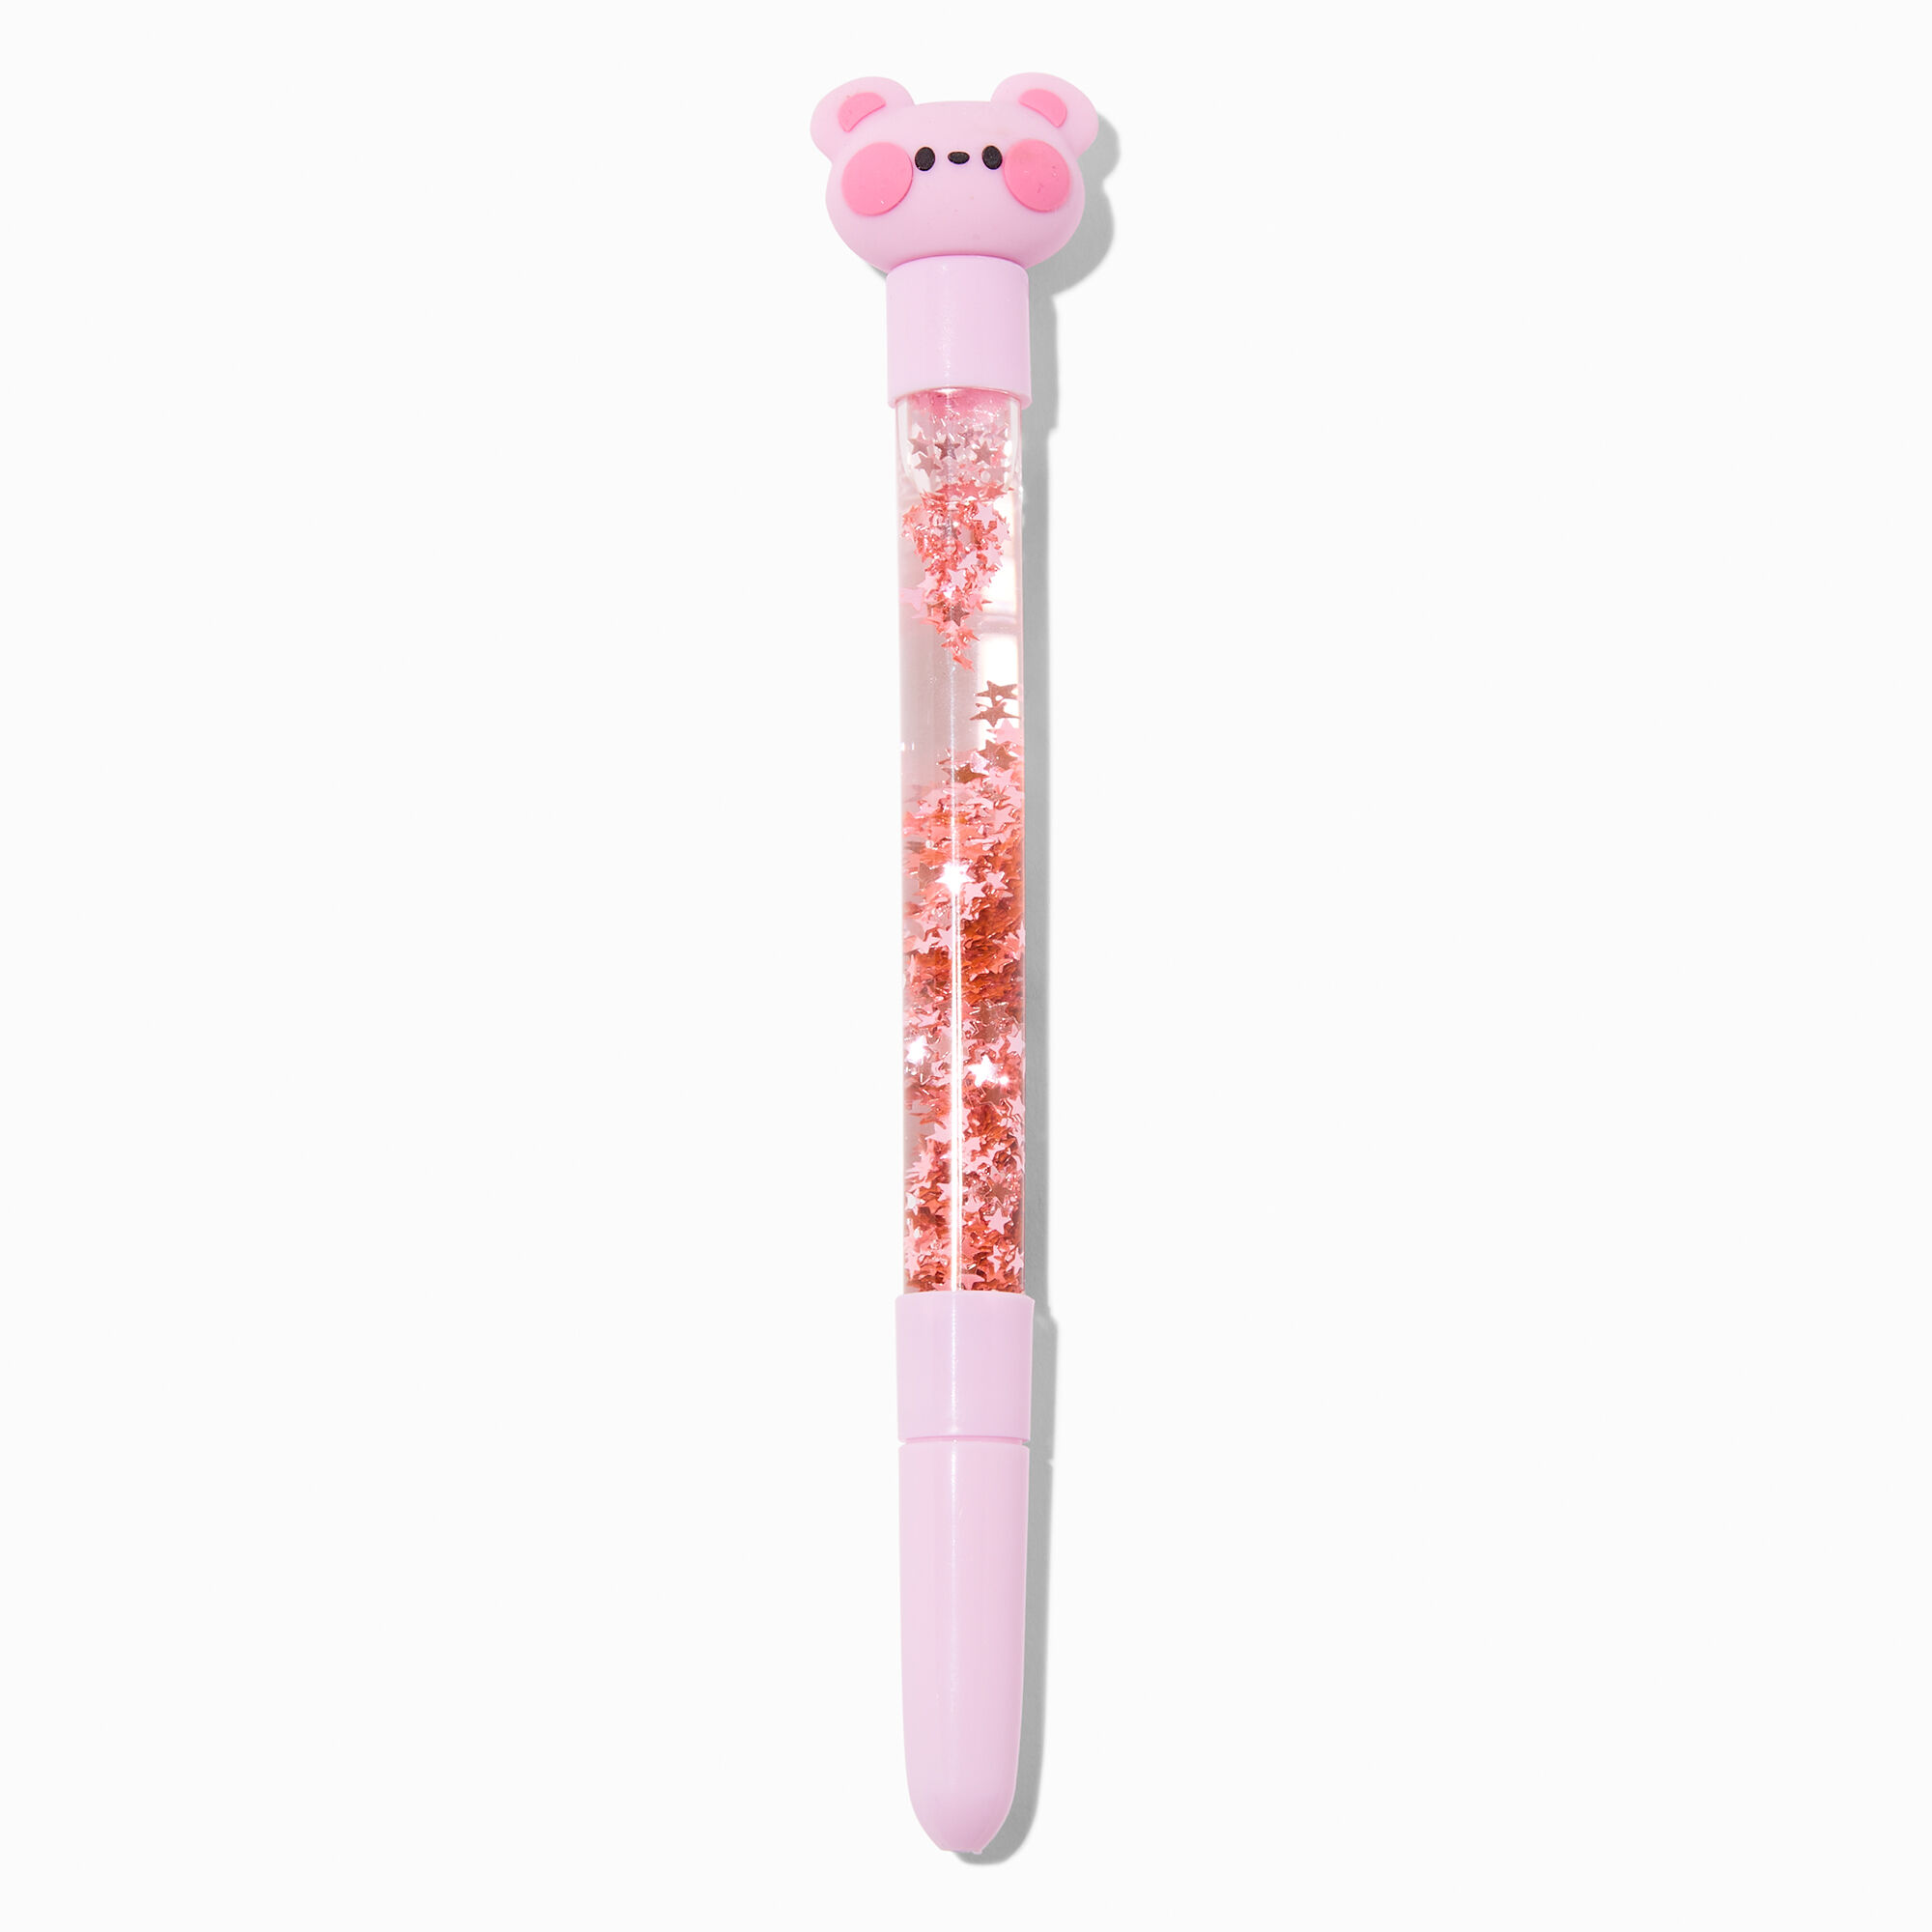 View Claires Bear WaterFilled Glitter Pen Pink information